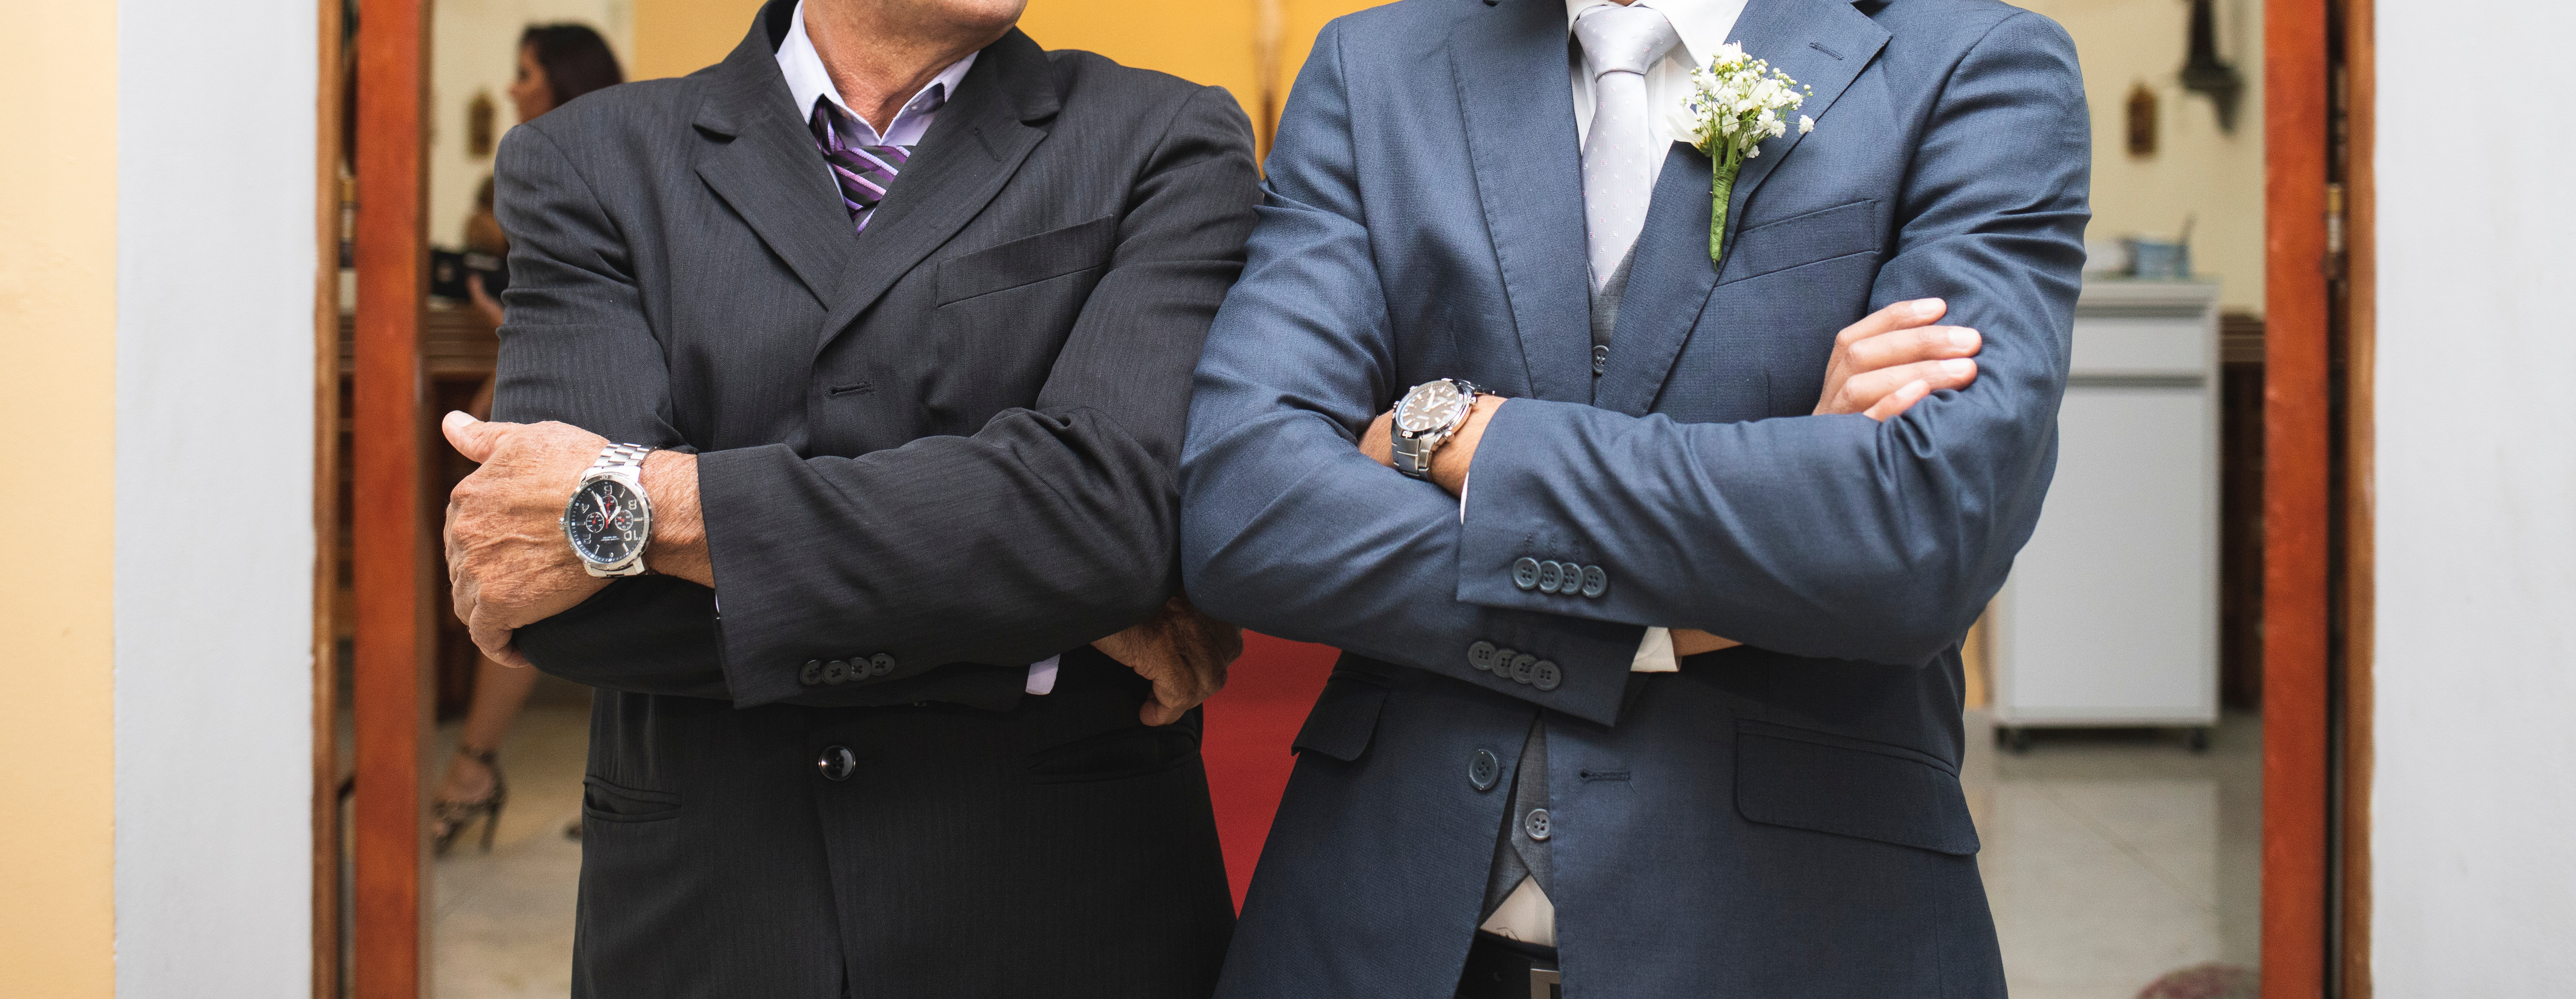 A father and a groom at the church door | Source: Shutterstock